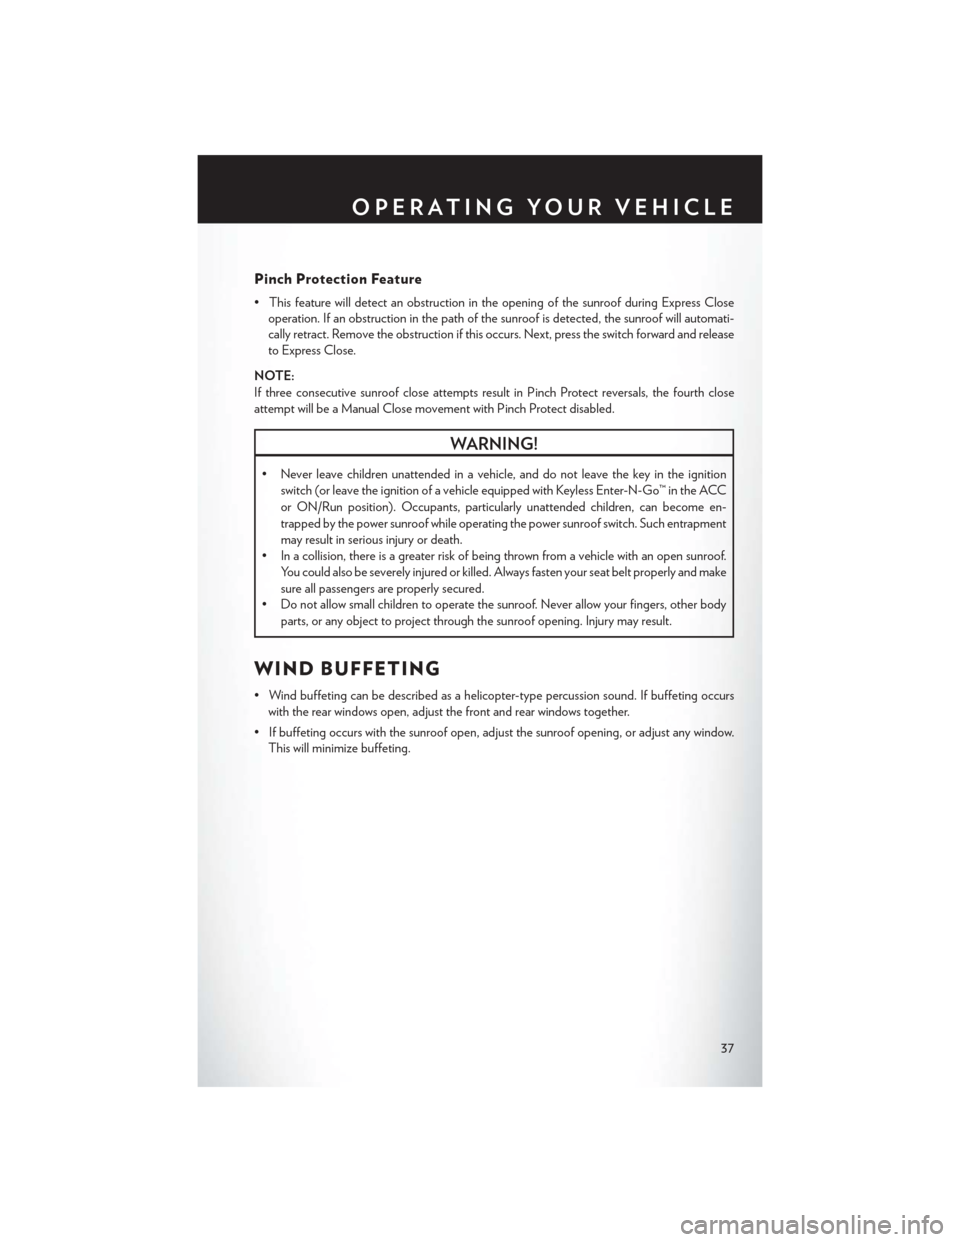 CHRYSLER 300 2013 2.G User Guide Pinch Protection Feature
• This feature will detect an obstruction in the opening of the sunroof during Express Closeoperation. If an obstruction in the path of the sunroof is detected, the sunroof 